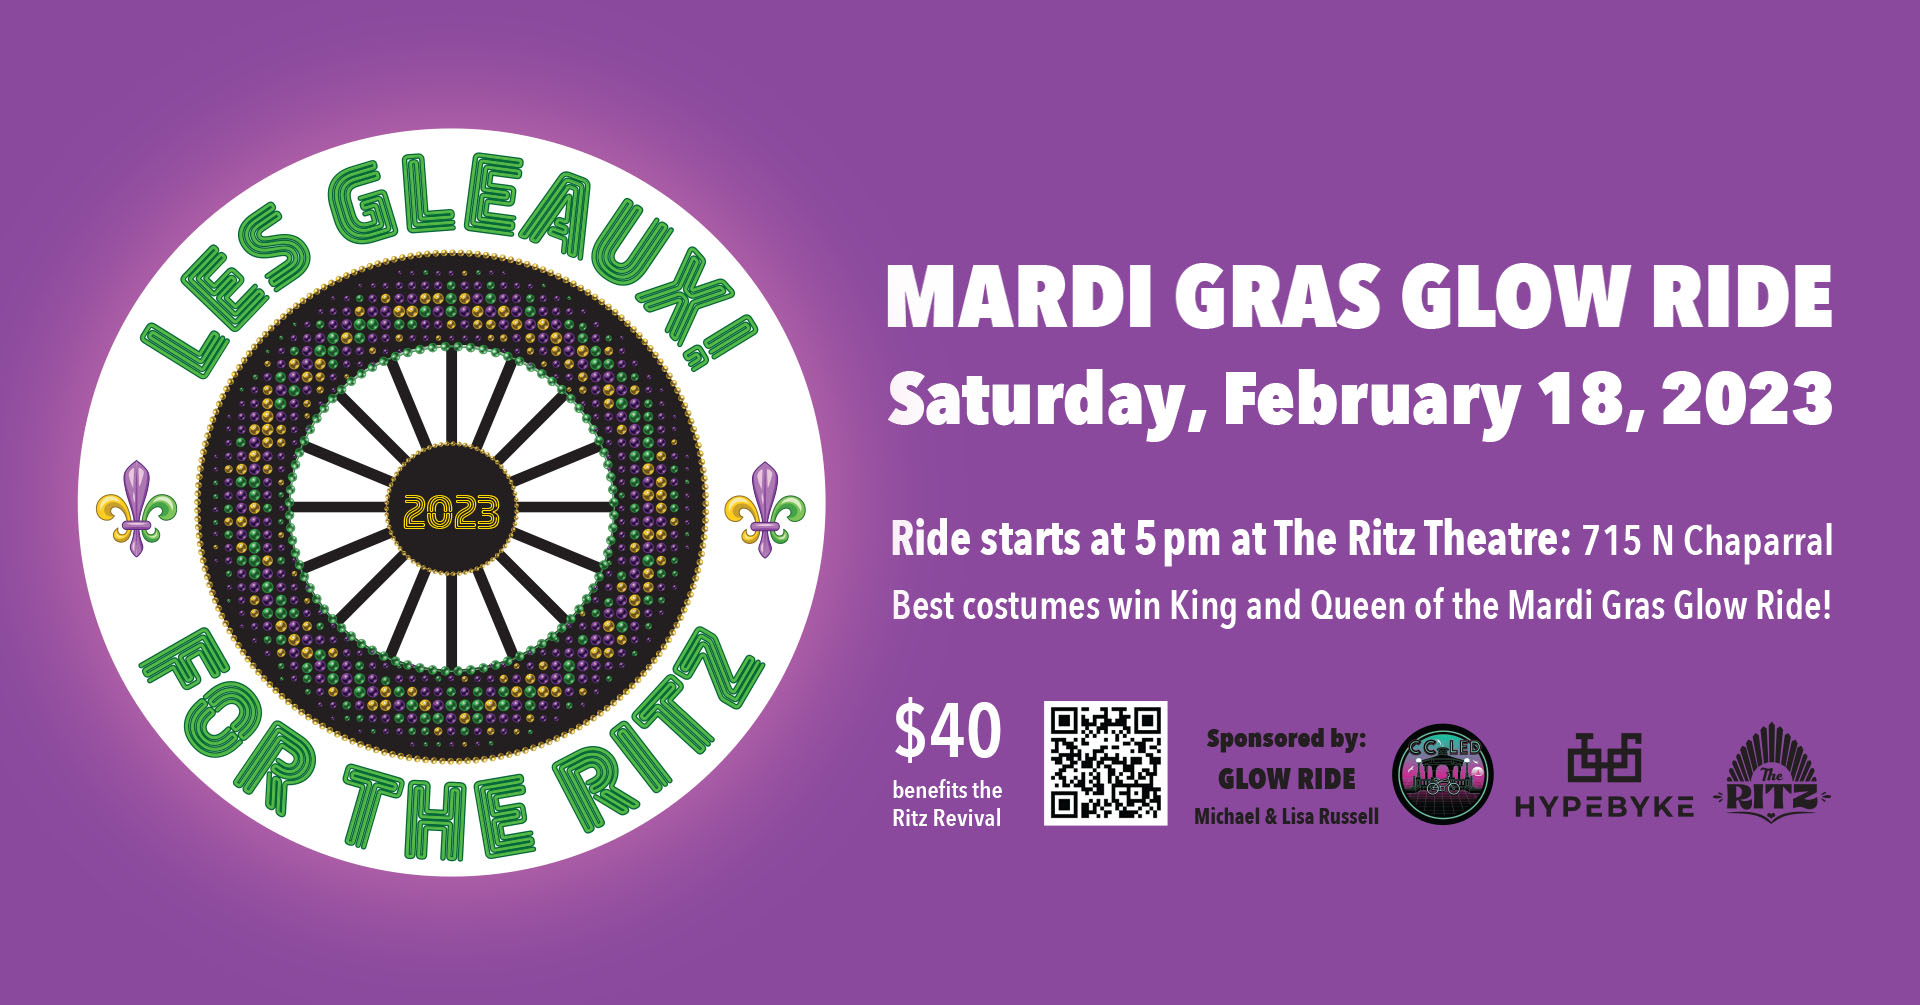 Les Gleaux for The Ritz! 2/18/23